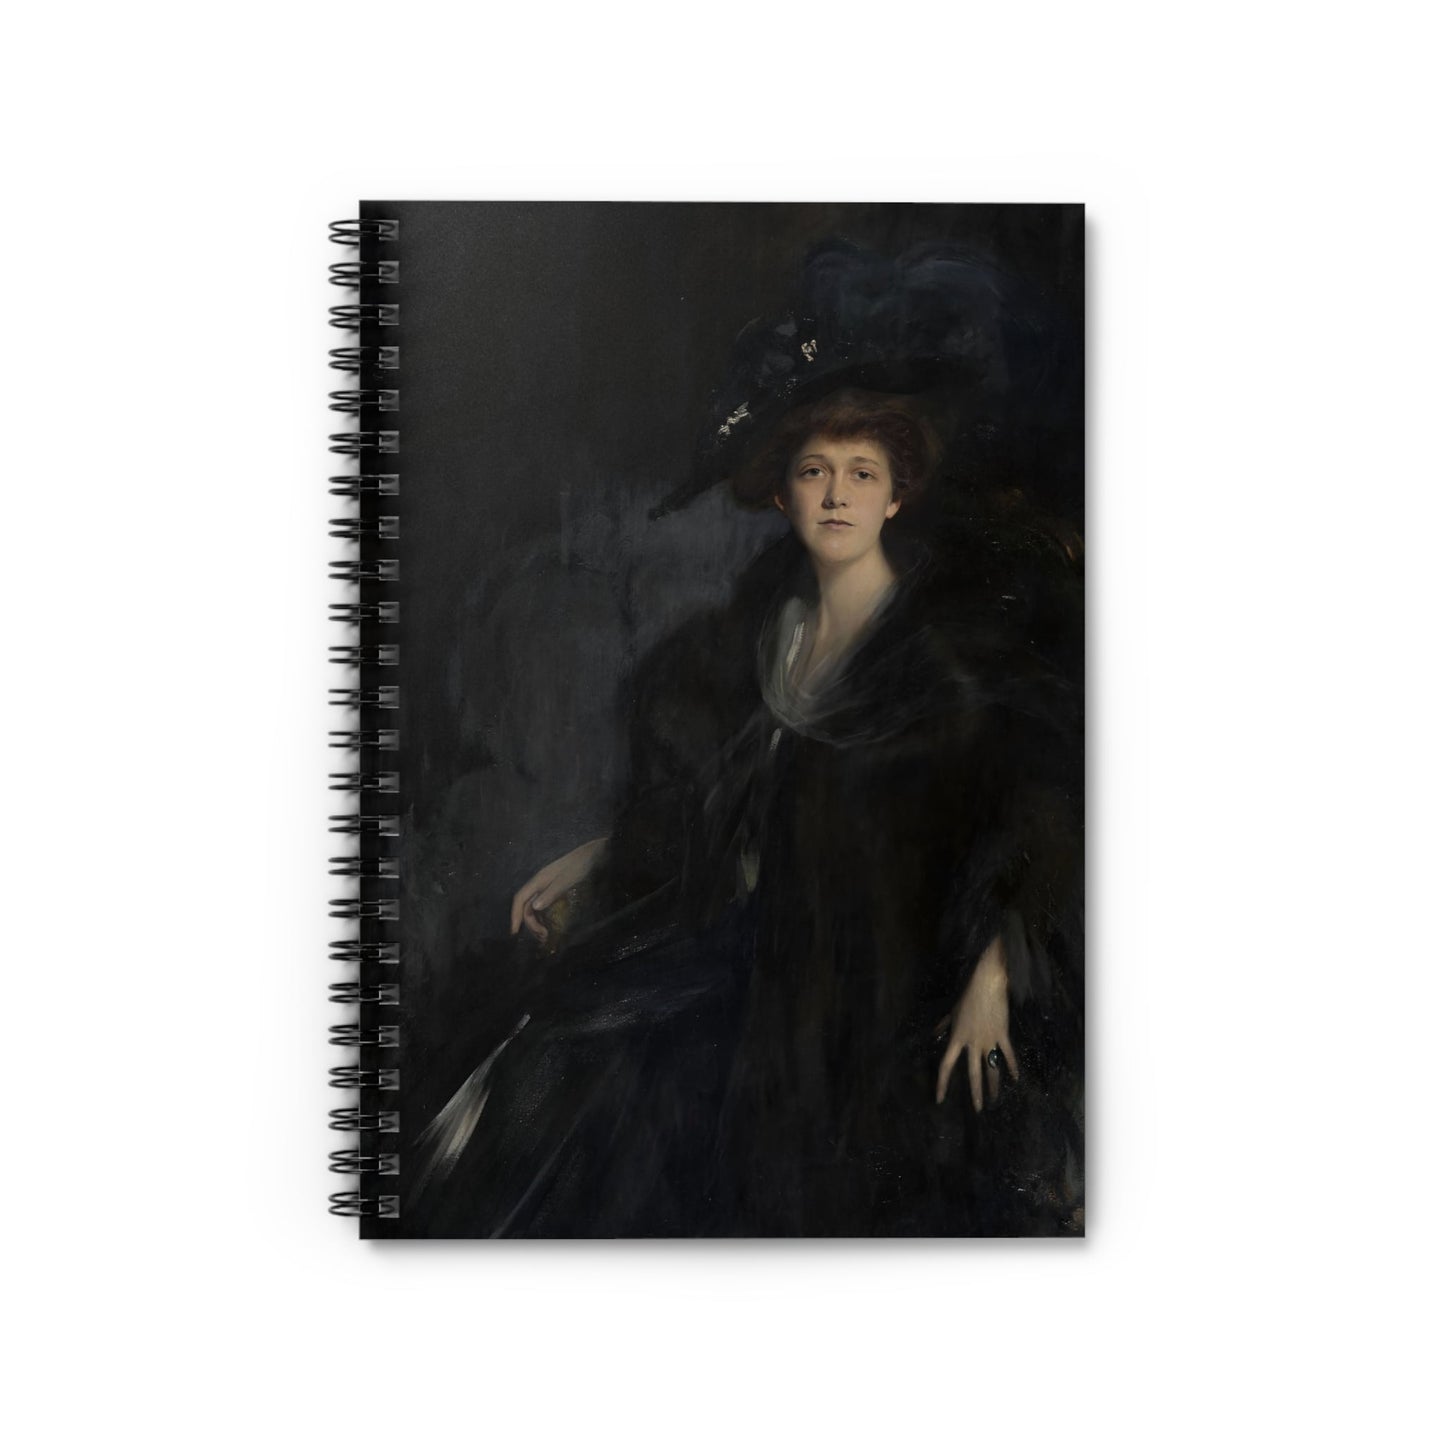 Dark Female Portrait Notebook with Lady in Blue cover, ideal for journaling and planning, showcasing a dark female portrait in blue.